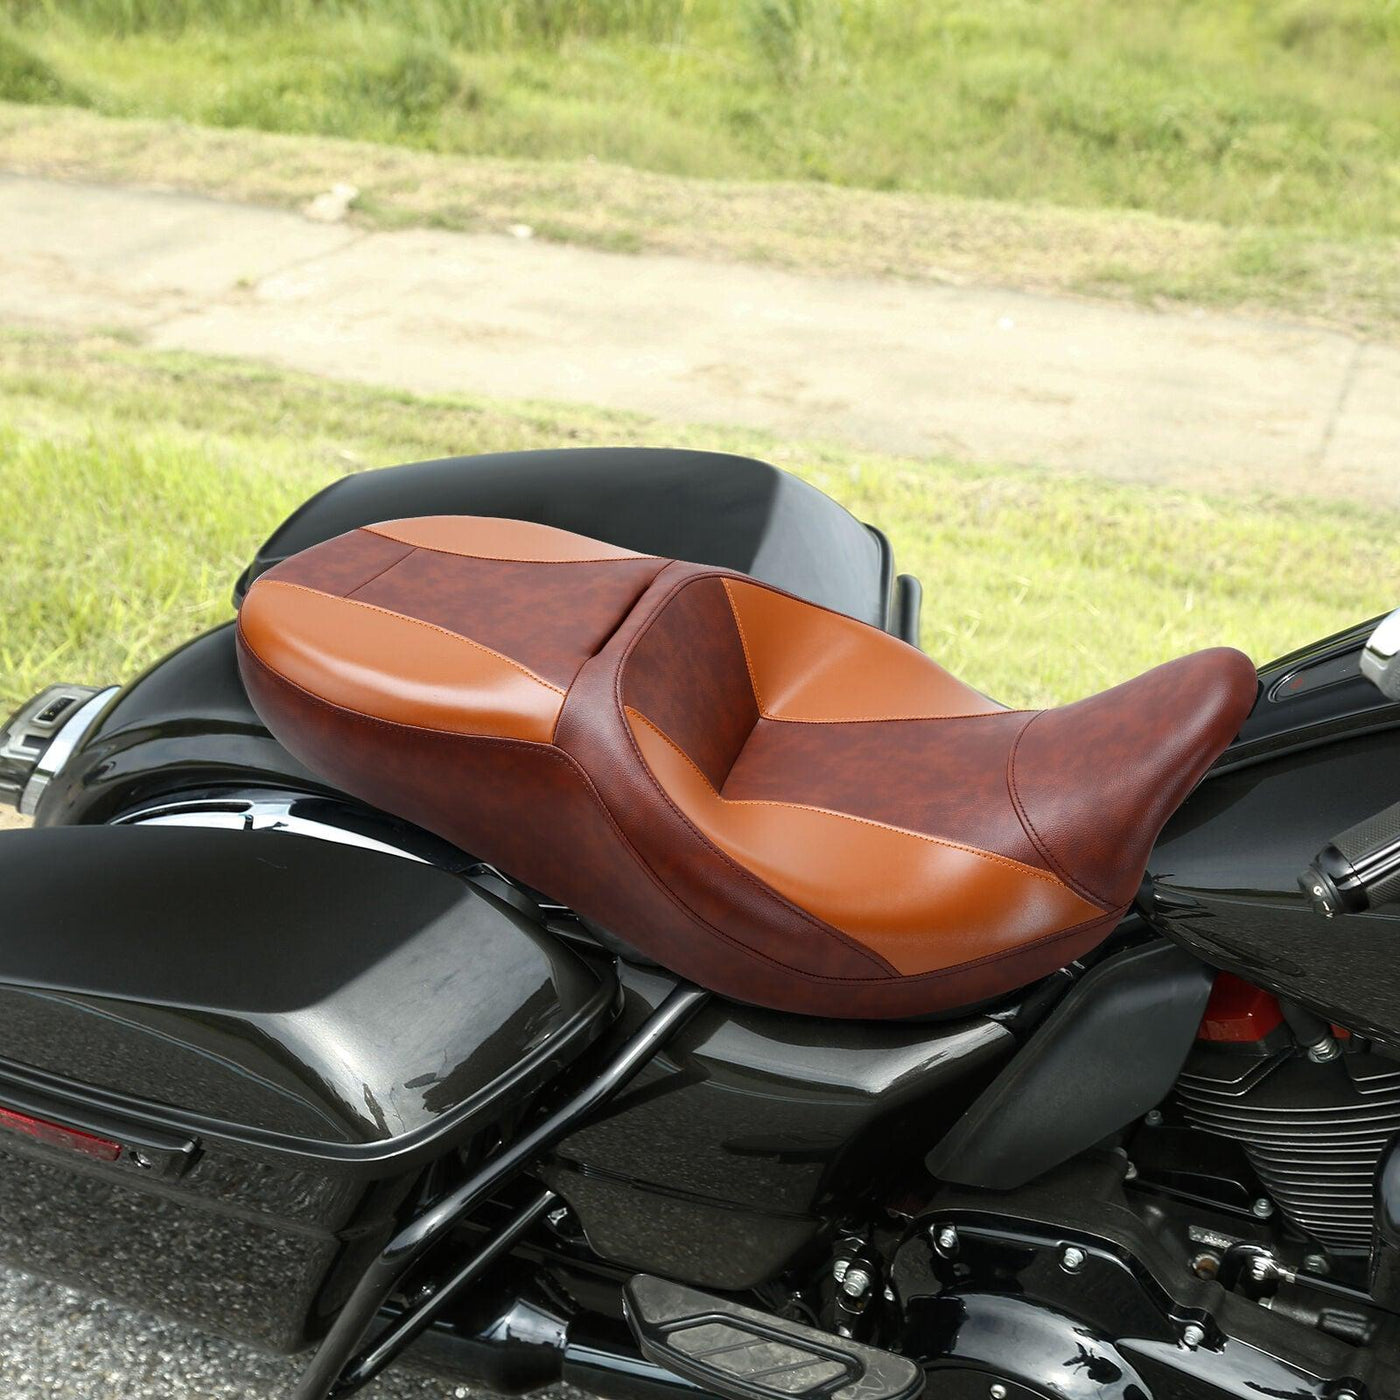 Desert Rider Passenger Seat Fit For Harley Electra Glide Road Glide 2009-2022 19 - Moto Life Products